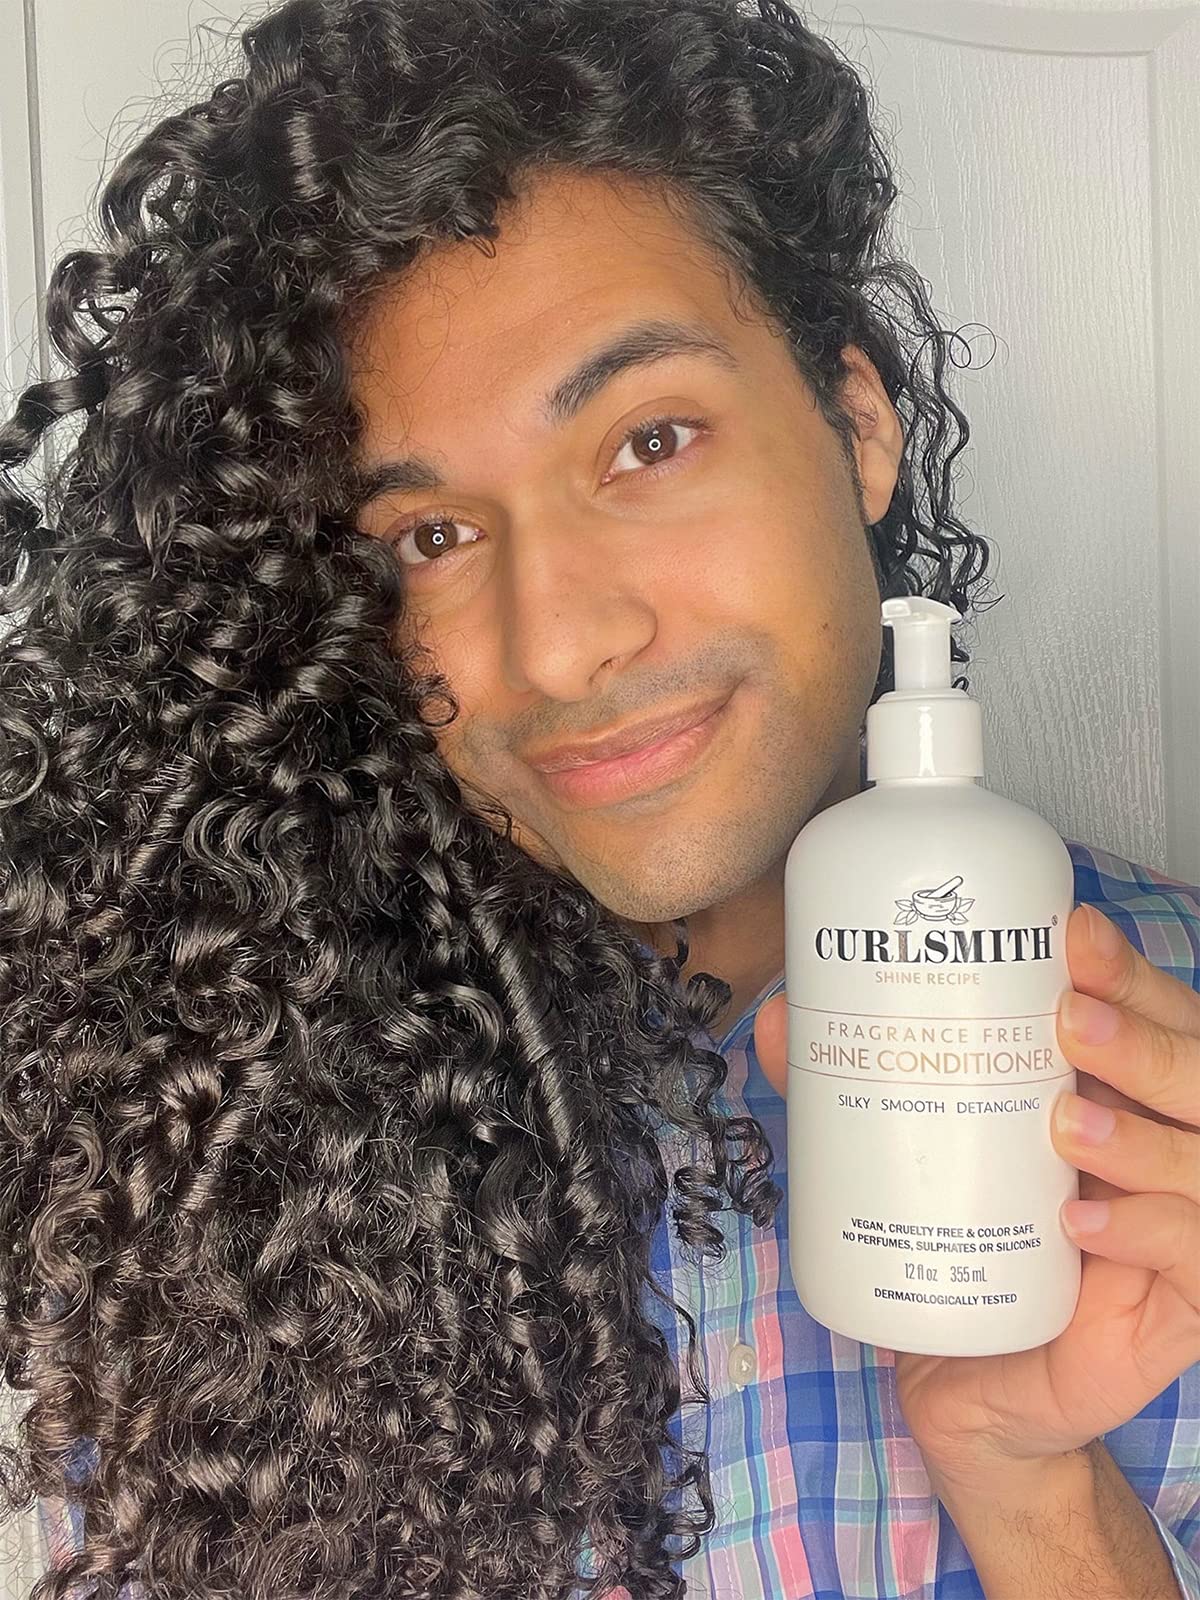 CURLSMITH - Shine Conditioner, Gentle and Moisturising, Sensitive, Fragrance Free for All Curl and Hair Types, Vegan (12 fl oz)